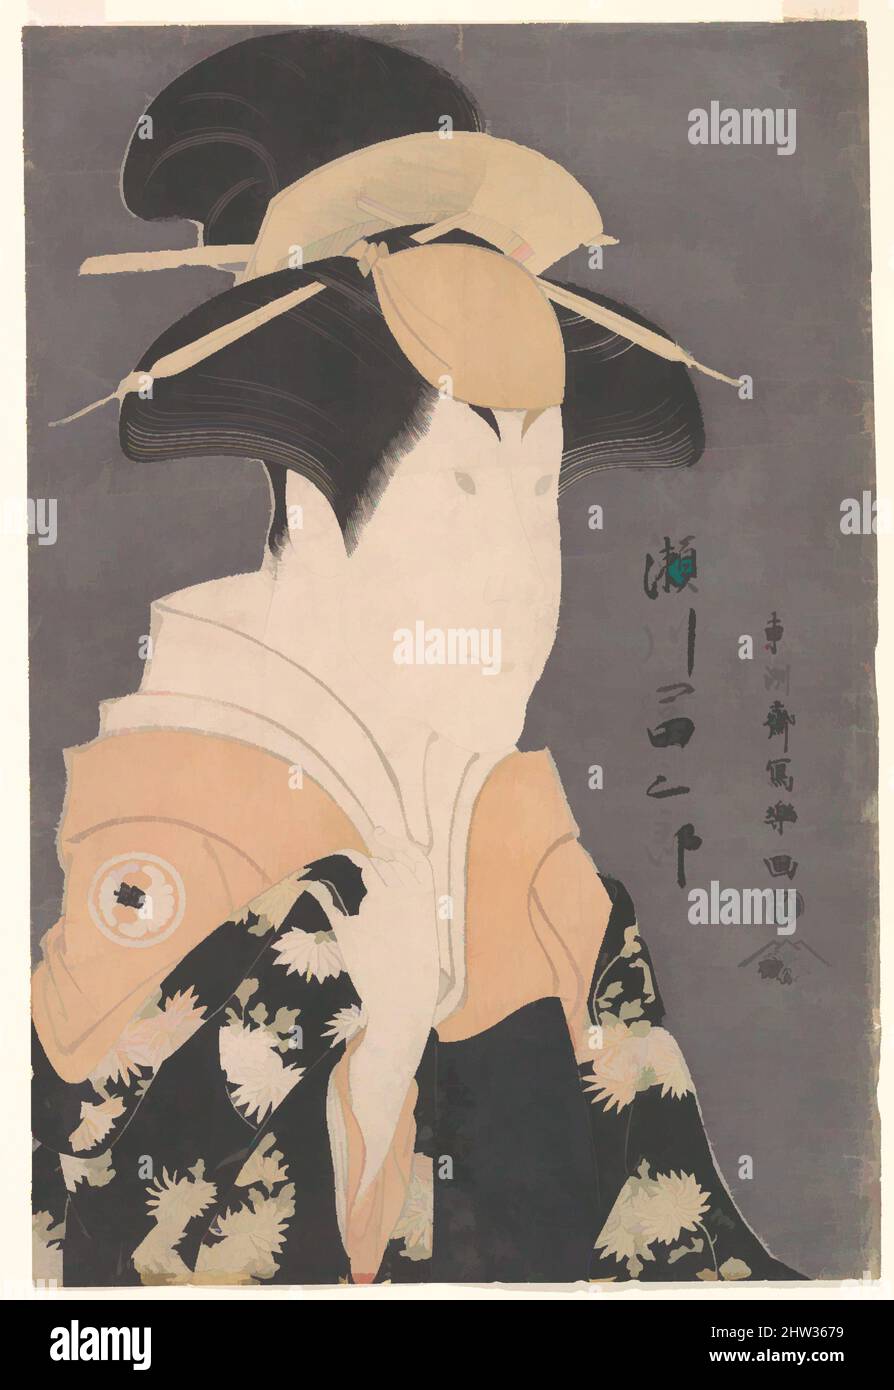 Art inspired by Segawa Tomisaburō II as Yadorigi in the Play 'Hana Ayame Bunroku Soga', Edo period (1615–1868), 1794, Japan, Polychrome woodblock print; ink, color, white mica on paper, H. 14 5/8 in. (37.1 cm); W. 9 7/8 in. (25.1 cm), Prints, Tōshūsai Sharaku (Japanese, active 1794–95, Classic works modernized by Artotop with a splash of modernity. Shapes, color and value, eye-catching visual impact on art. Emotions through freedom of artworks in a contemporary way. A timeless message pursuing a wildly creative new direction. Artists turning to the digital medium and creating the Artotop NFT Stock Photo